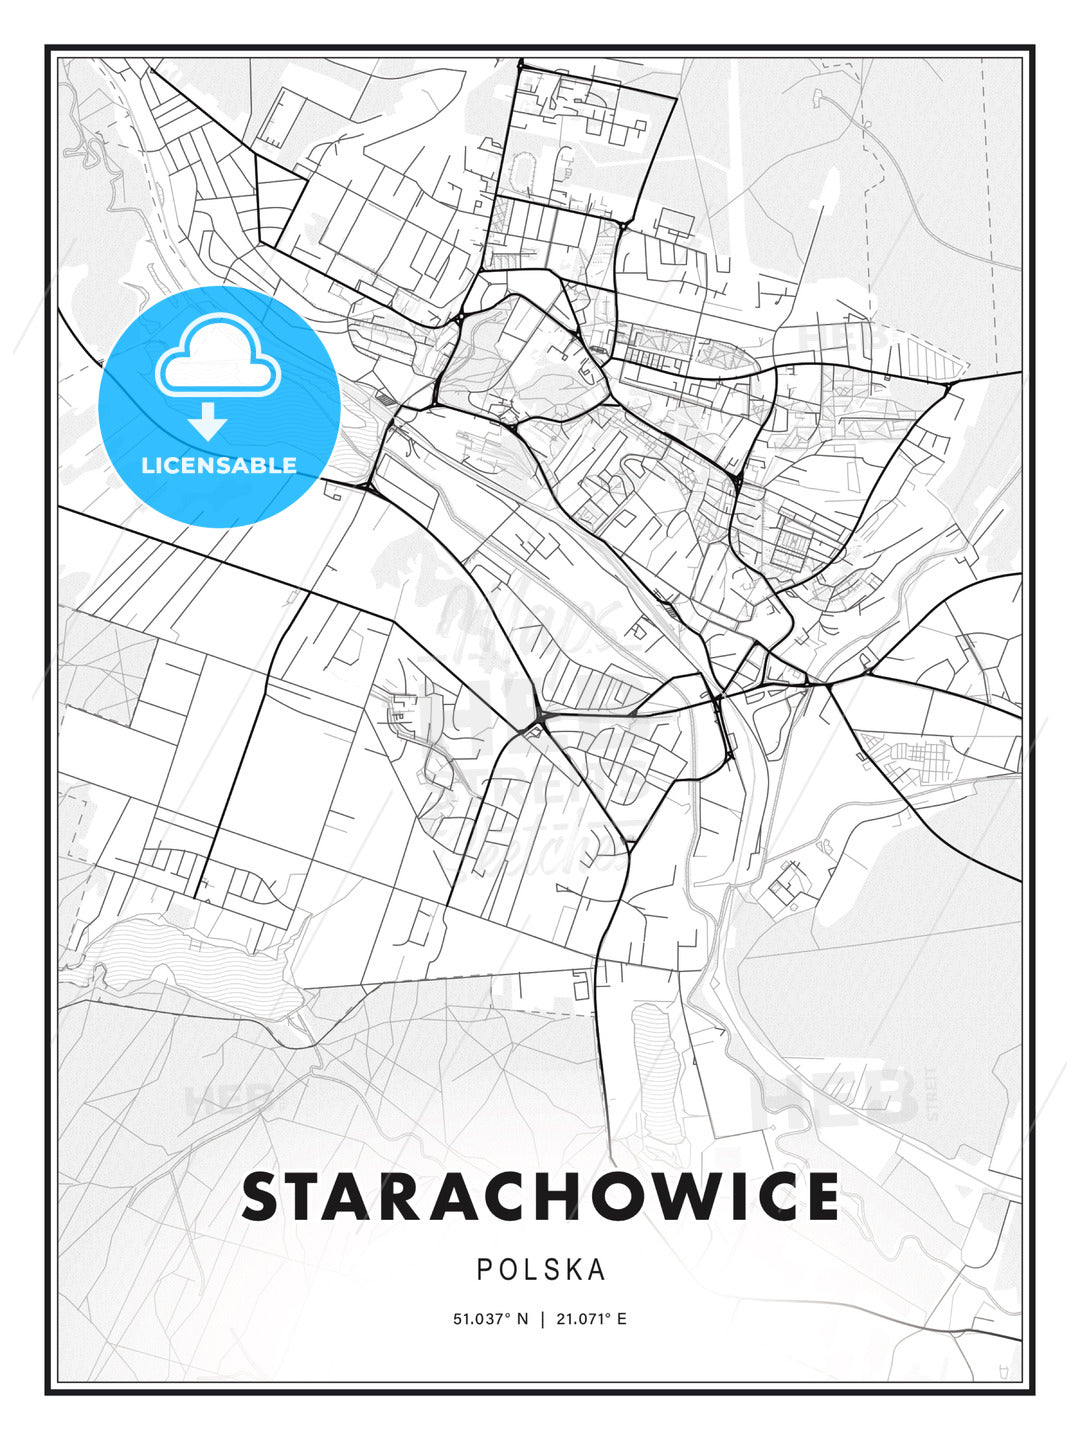 Starachowice, Poland, Modern Print Template in Various Formats - HEBSTREITS Sketches